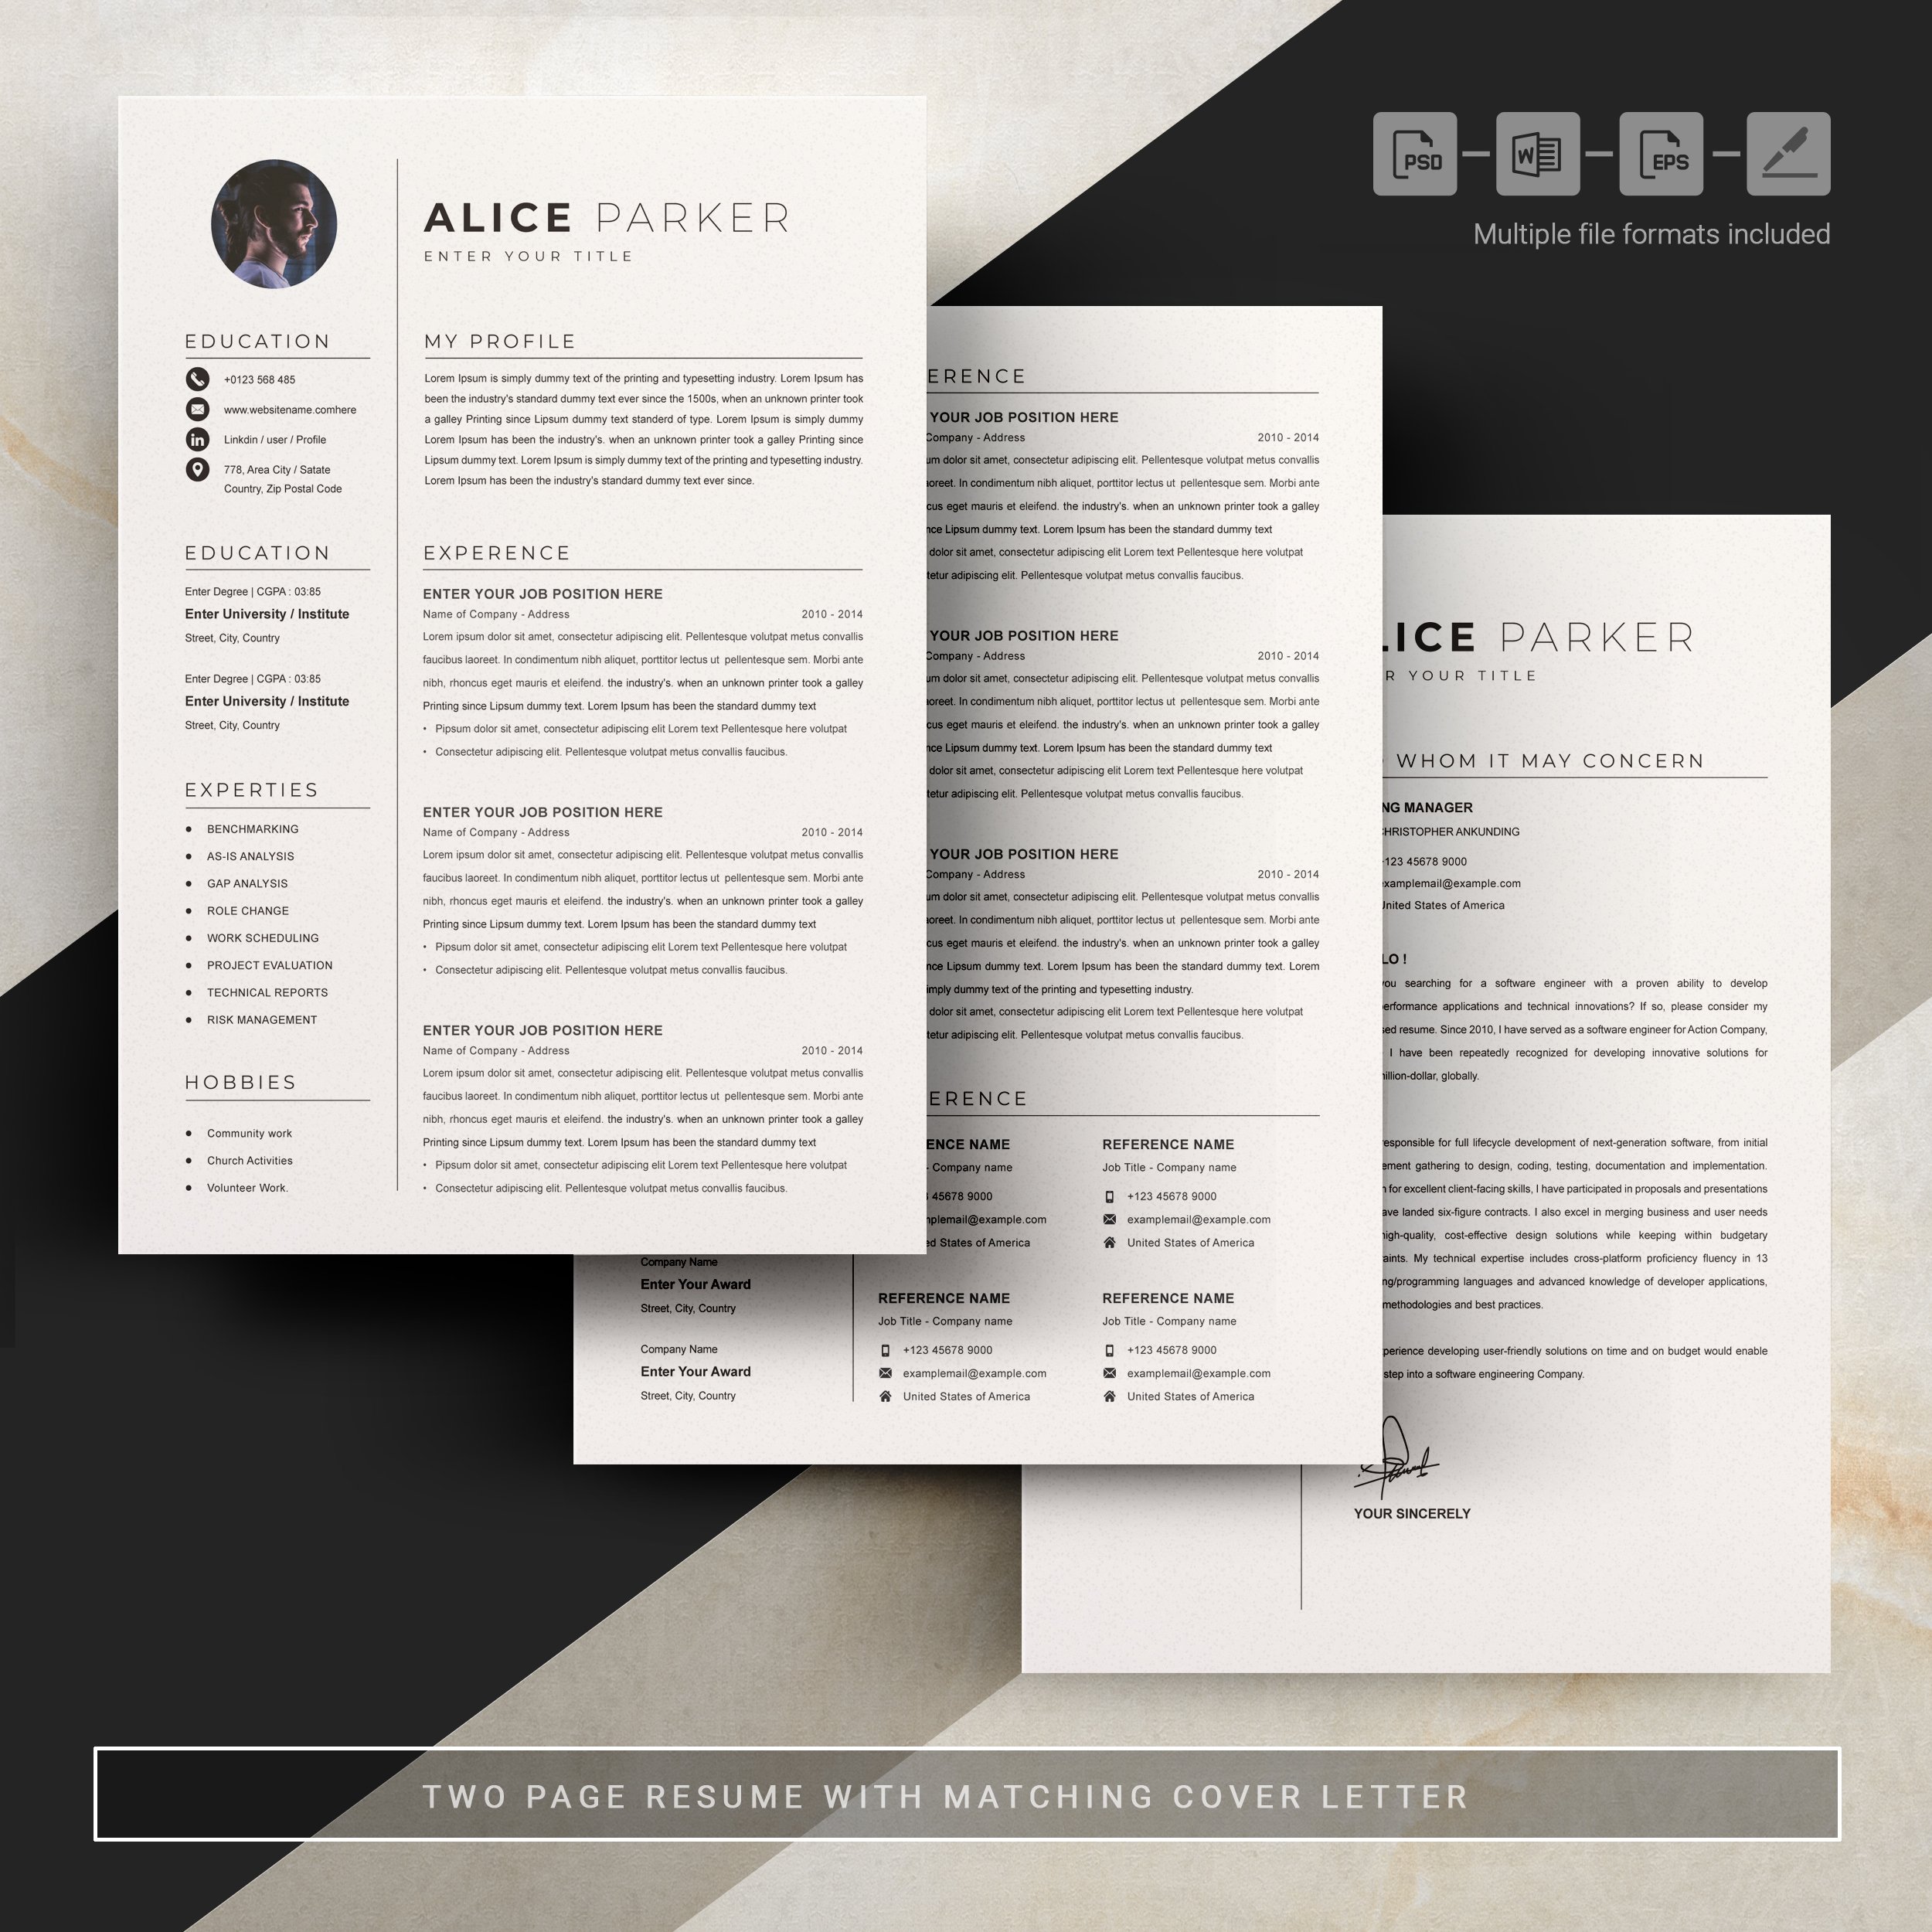 05 3 pages free resume design template 765